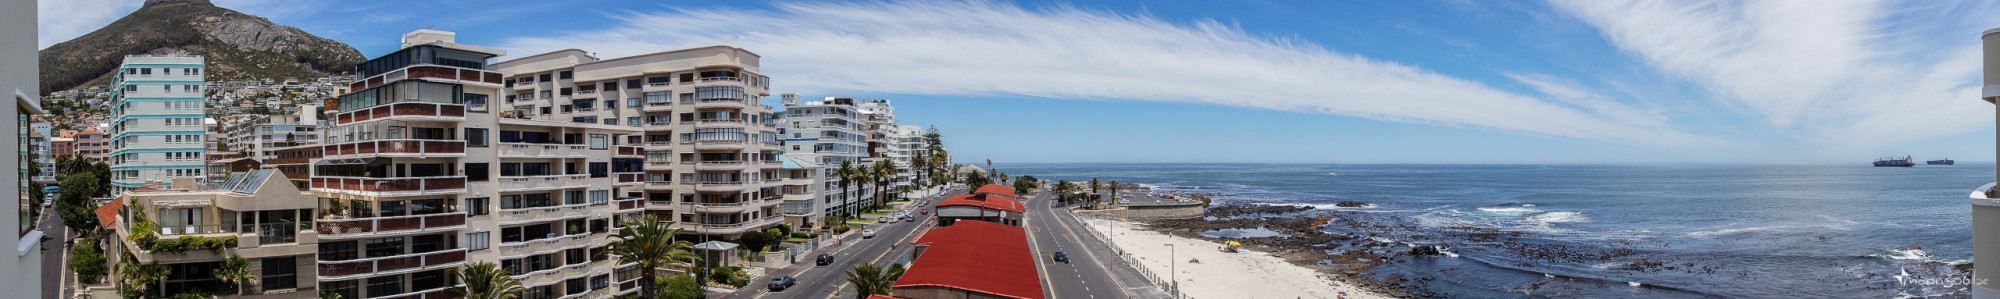 Cape Town - Seapoint